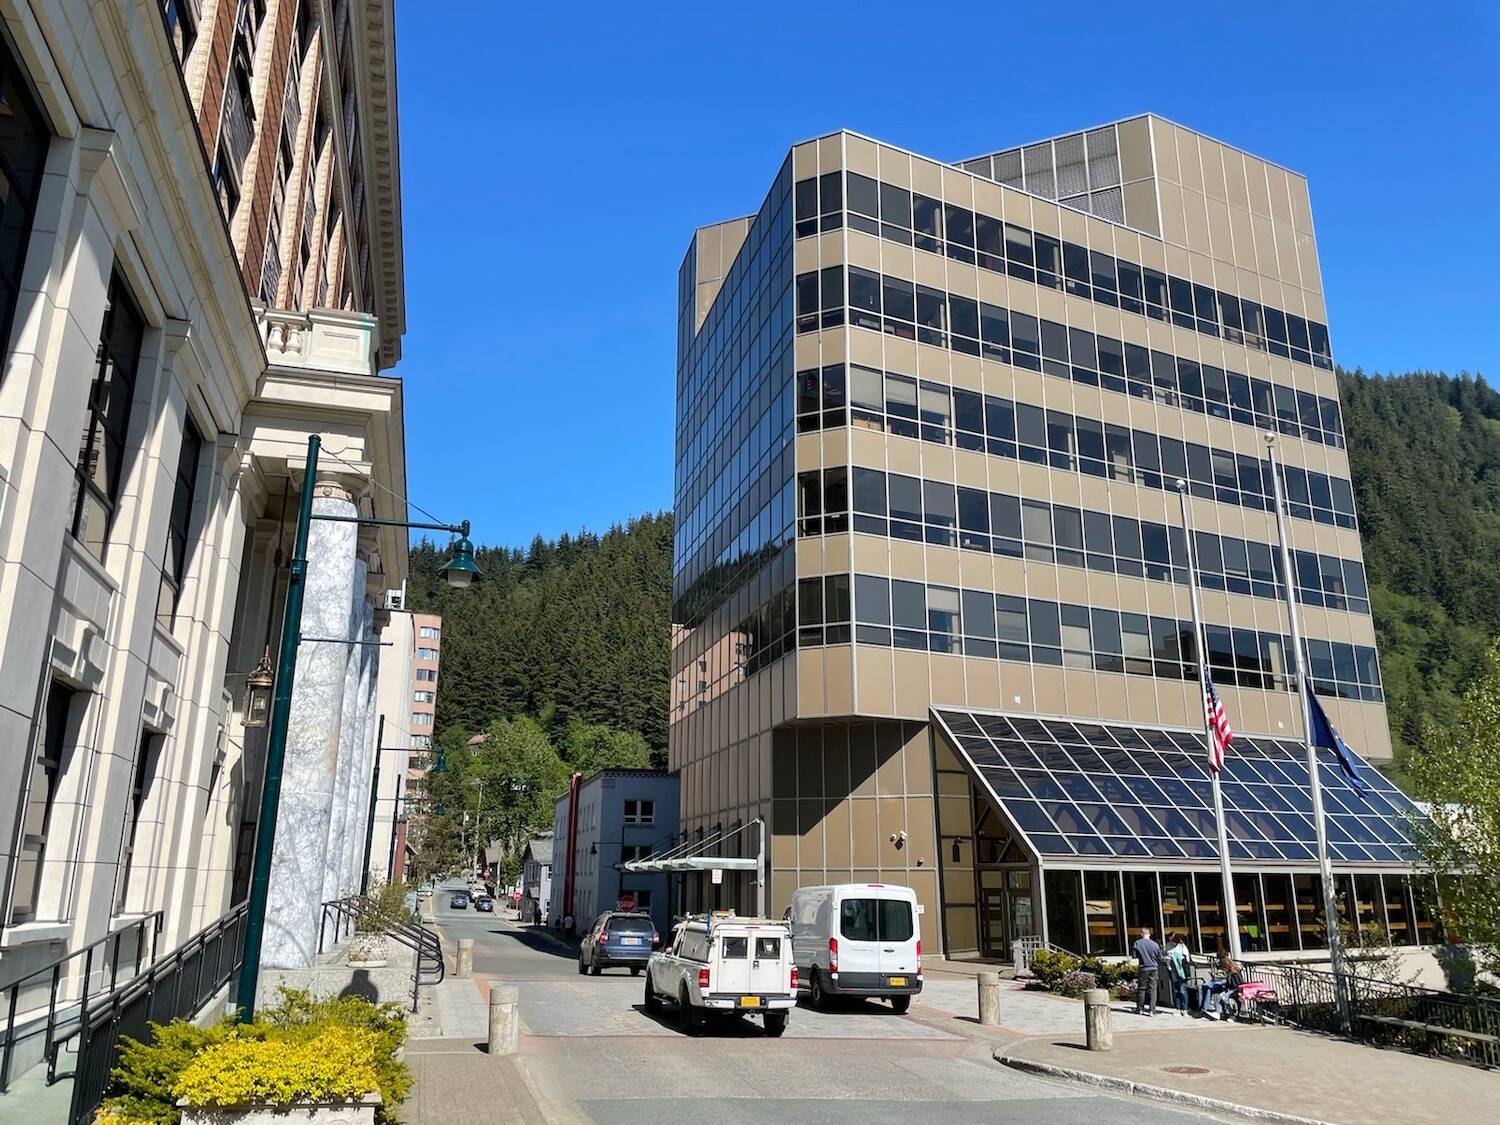 The Dimond Courthouse building, home to the Juneau offices of the Alaska Department of Law, is seen across the street from the Alaska State Capitol on May 27, 2022. (Photo by Lisa Phu/Alaska Beacon)